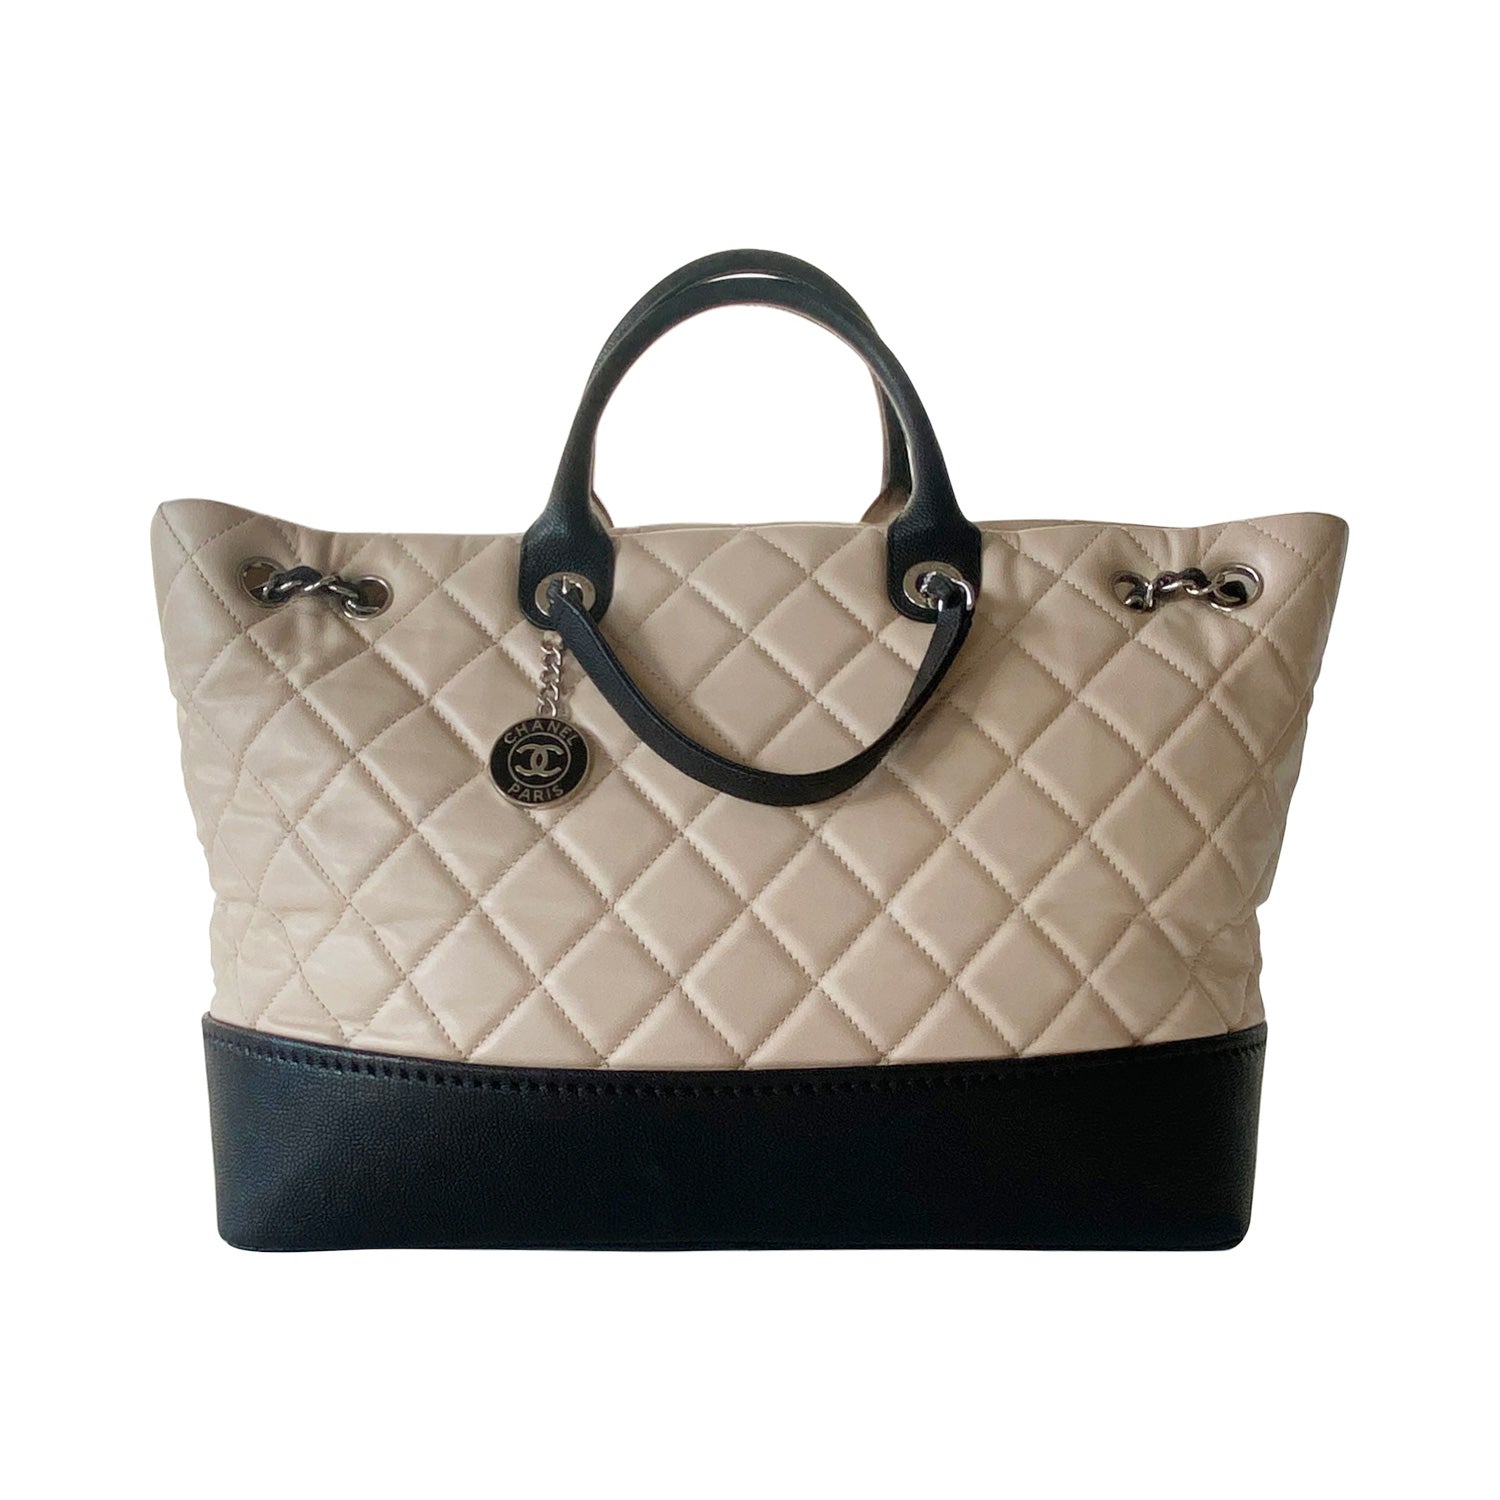 Shop authentic Chanel Quilted Shopper Tote Bag at revogue for just